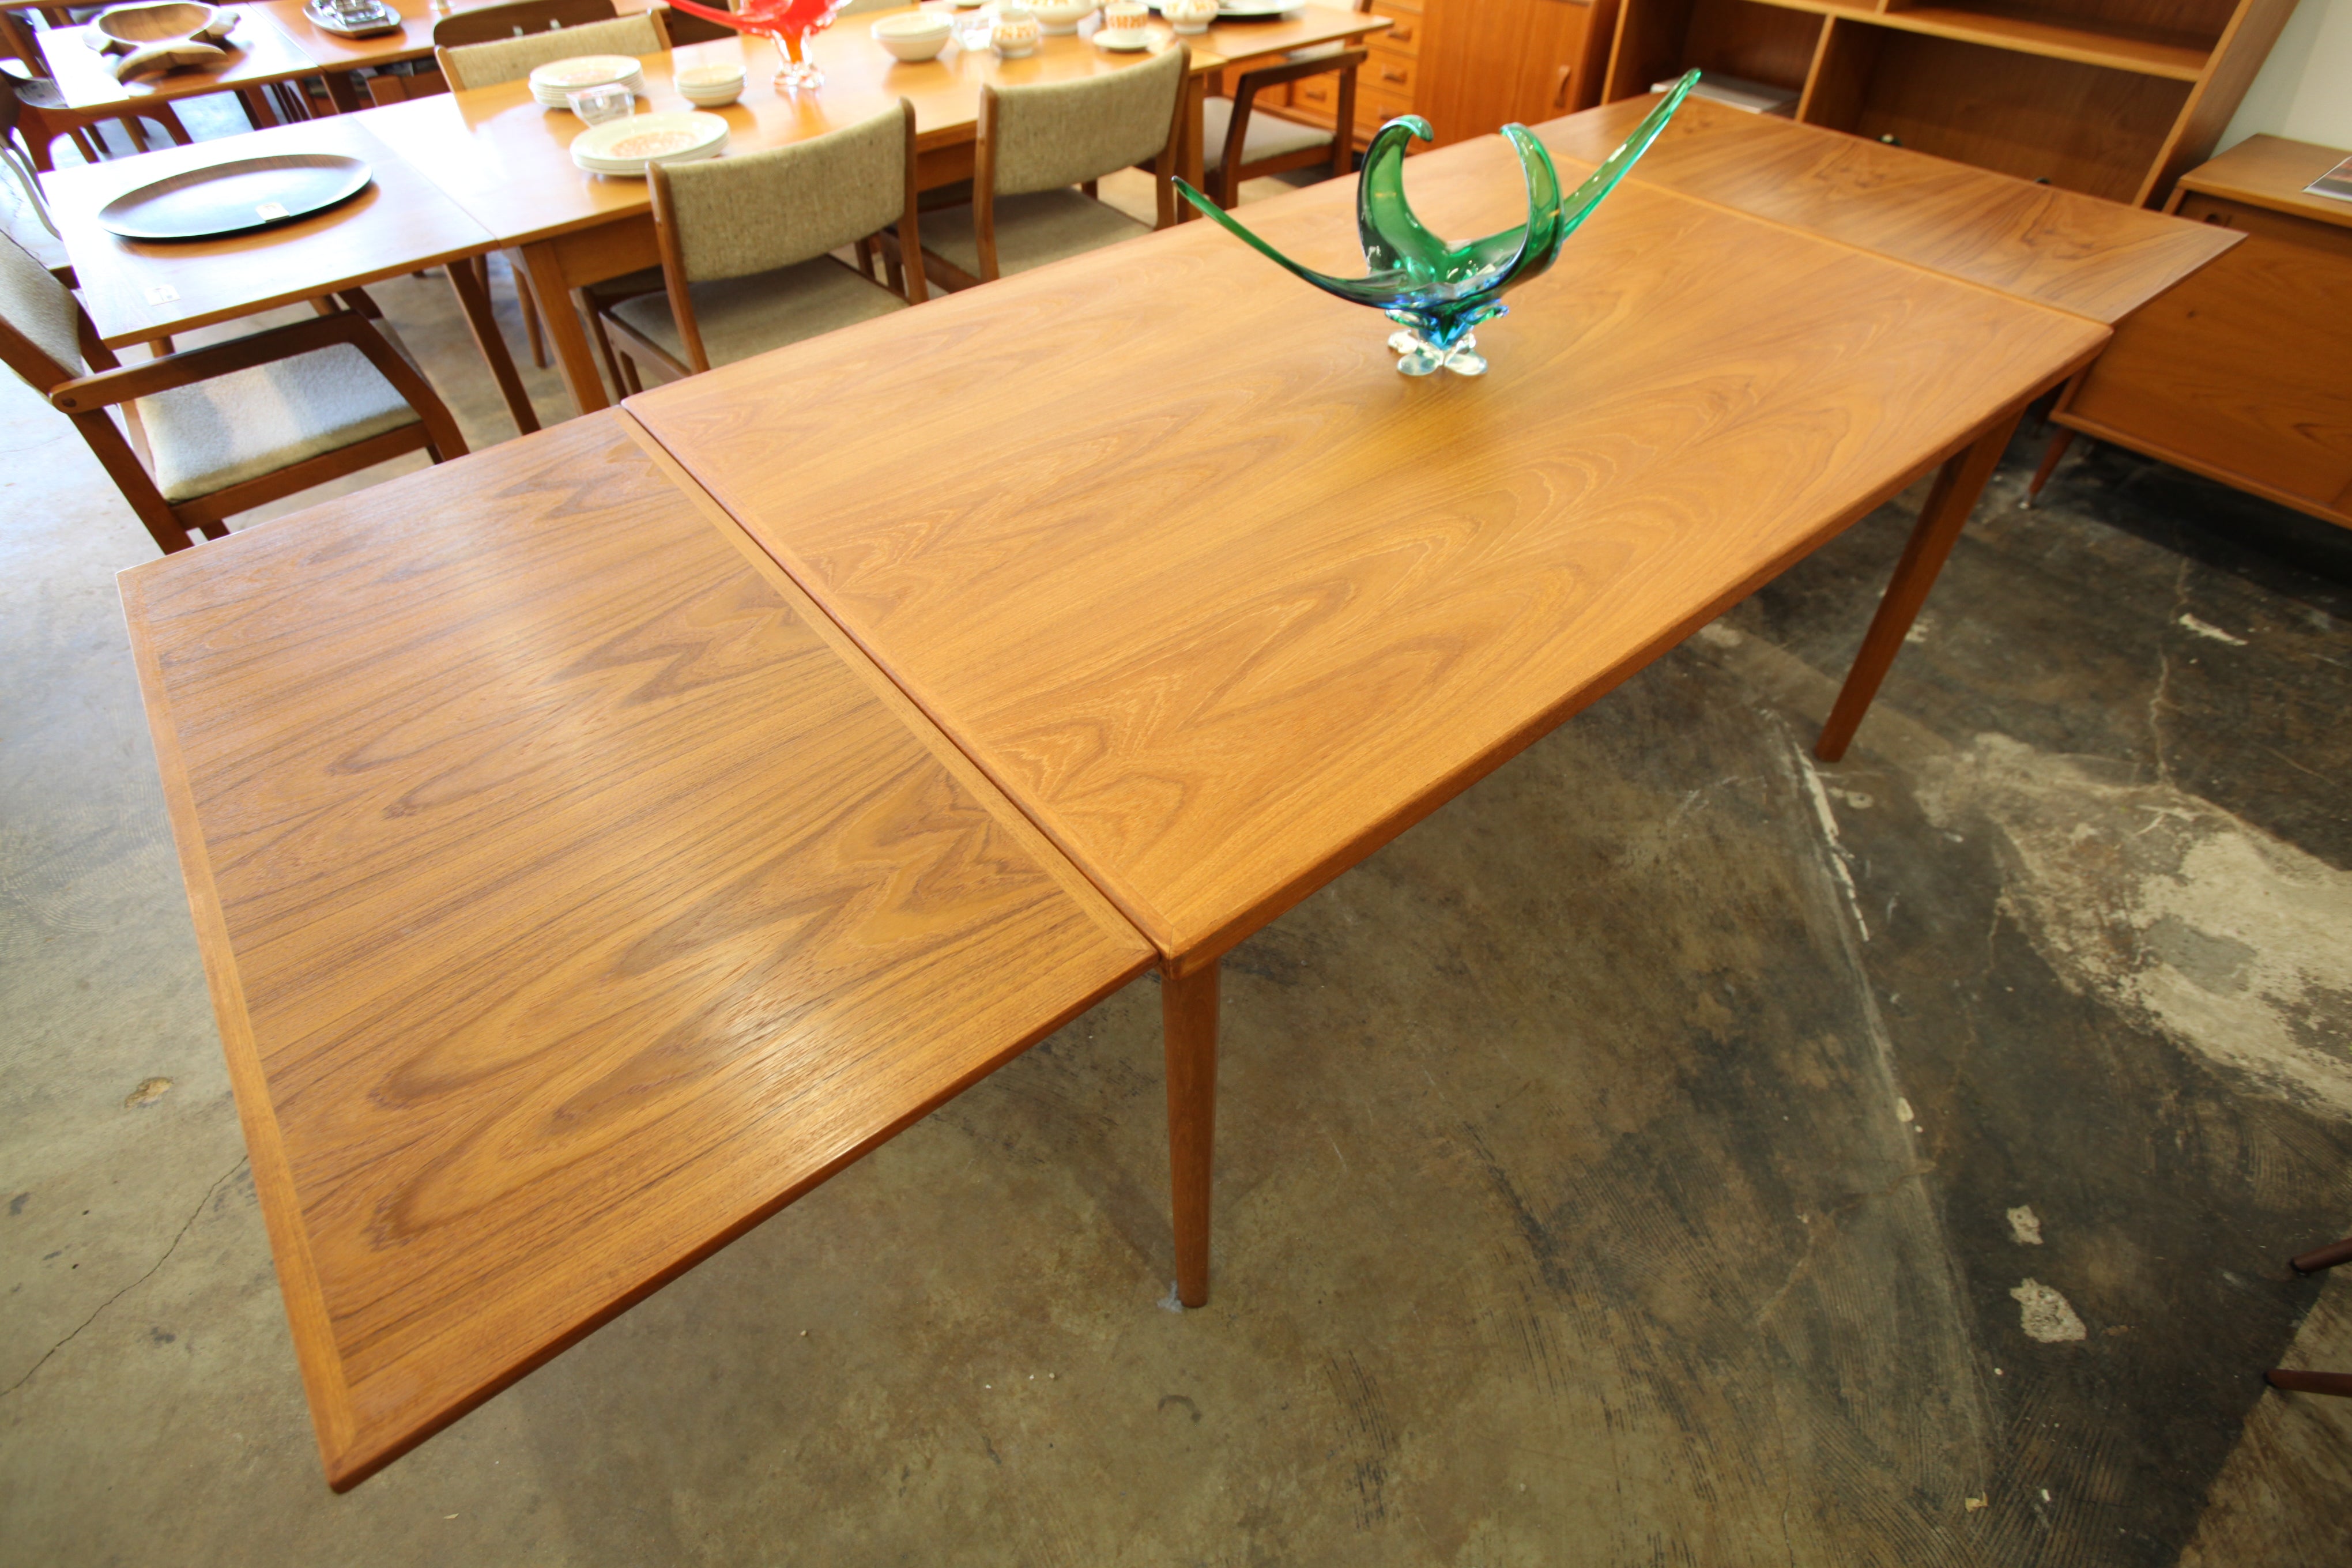 Vintage Danish Teak Dining Table w/ Pullout Extensions (59"x39.25")(98"x39.25") 29"H